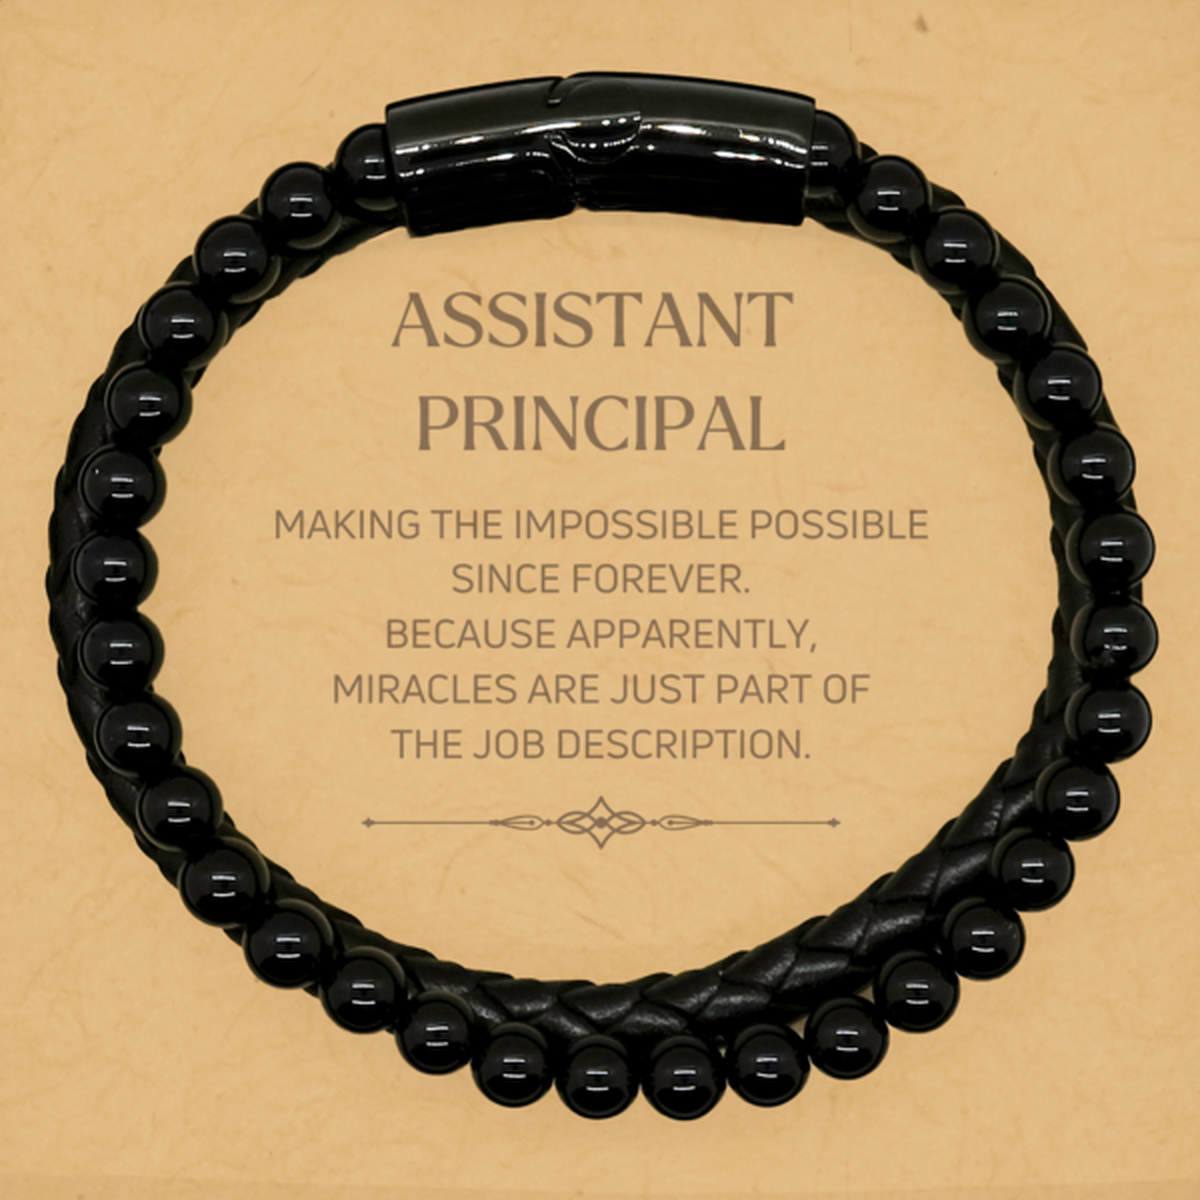 Funny Assistant Principal Gifts, Miracles are just part of the job description, Inspirational Birthday Stone Leather Bracelets For Assistant Principal, Men, Women, Coworkers, Friends, Boss